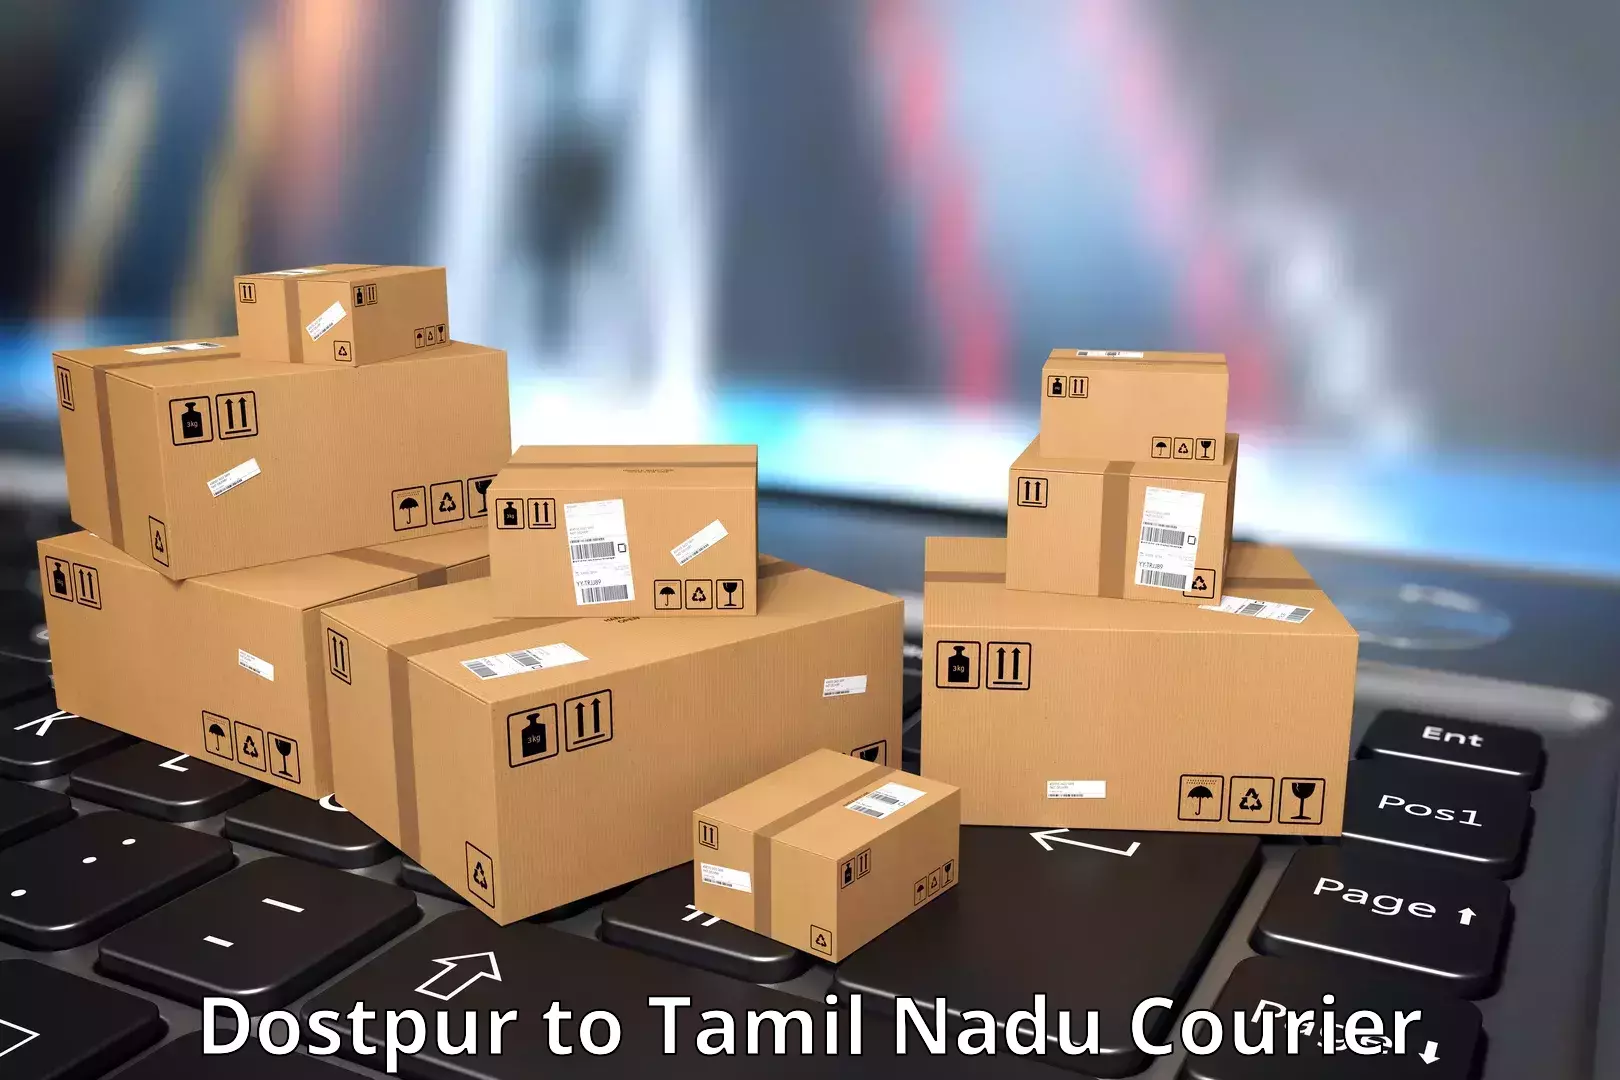 Quality courier services Dostpur to Chennai